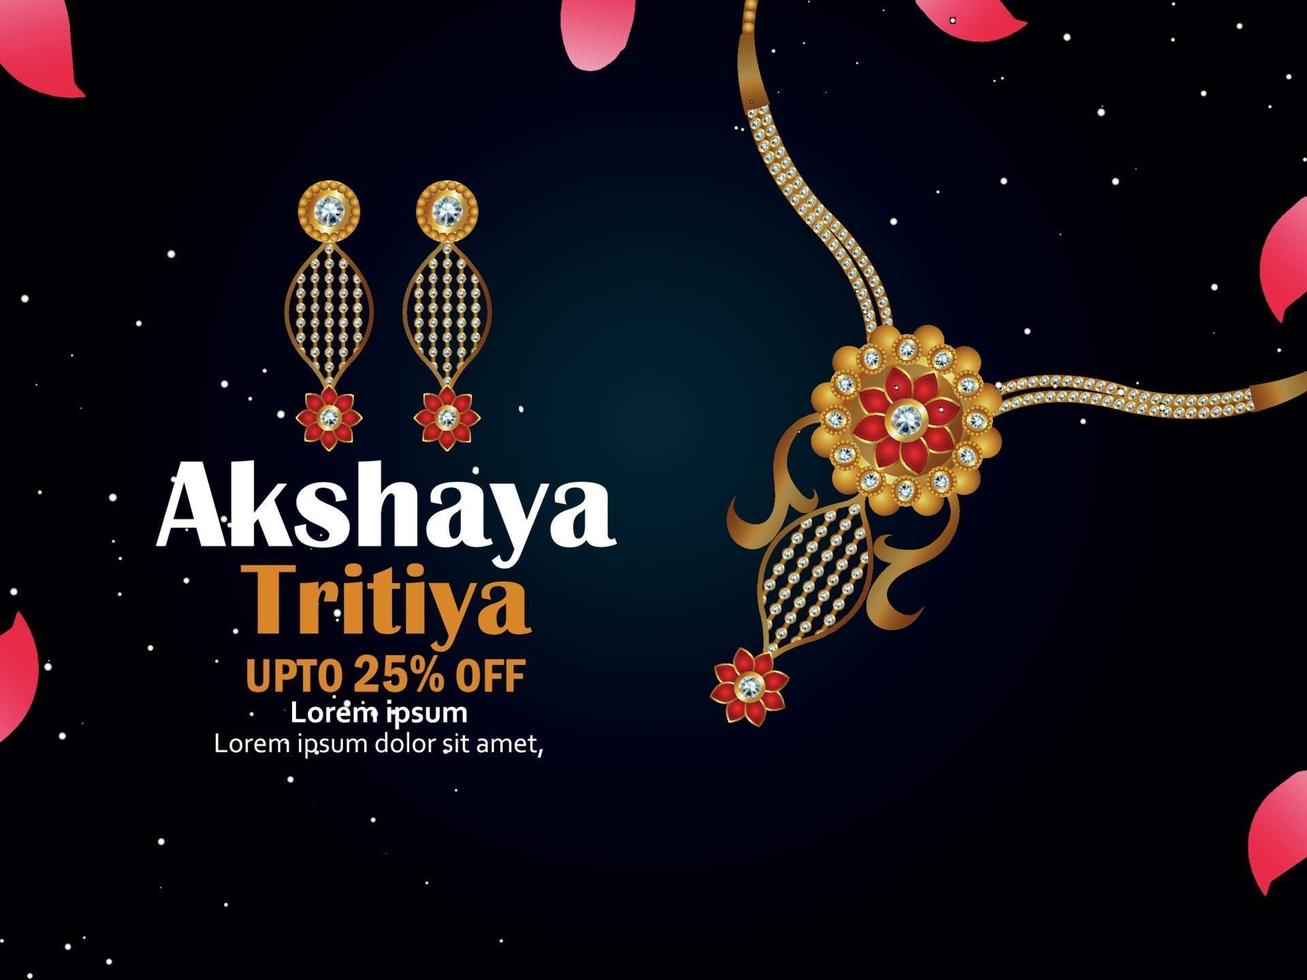 Vector illustration of Akshaya Tritiya celebration jewellery. Sale promotion greeting card with creative necklace and earrings